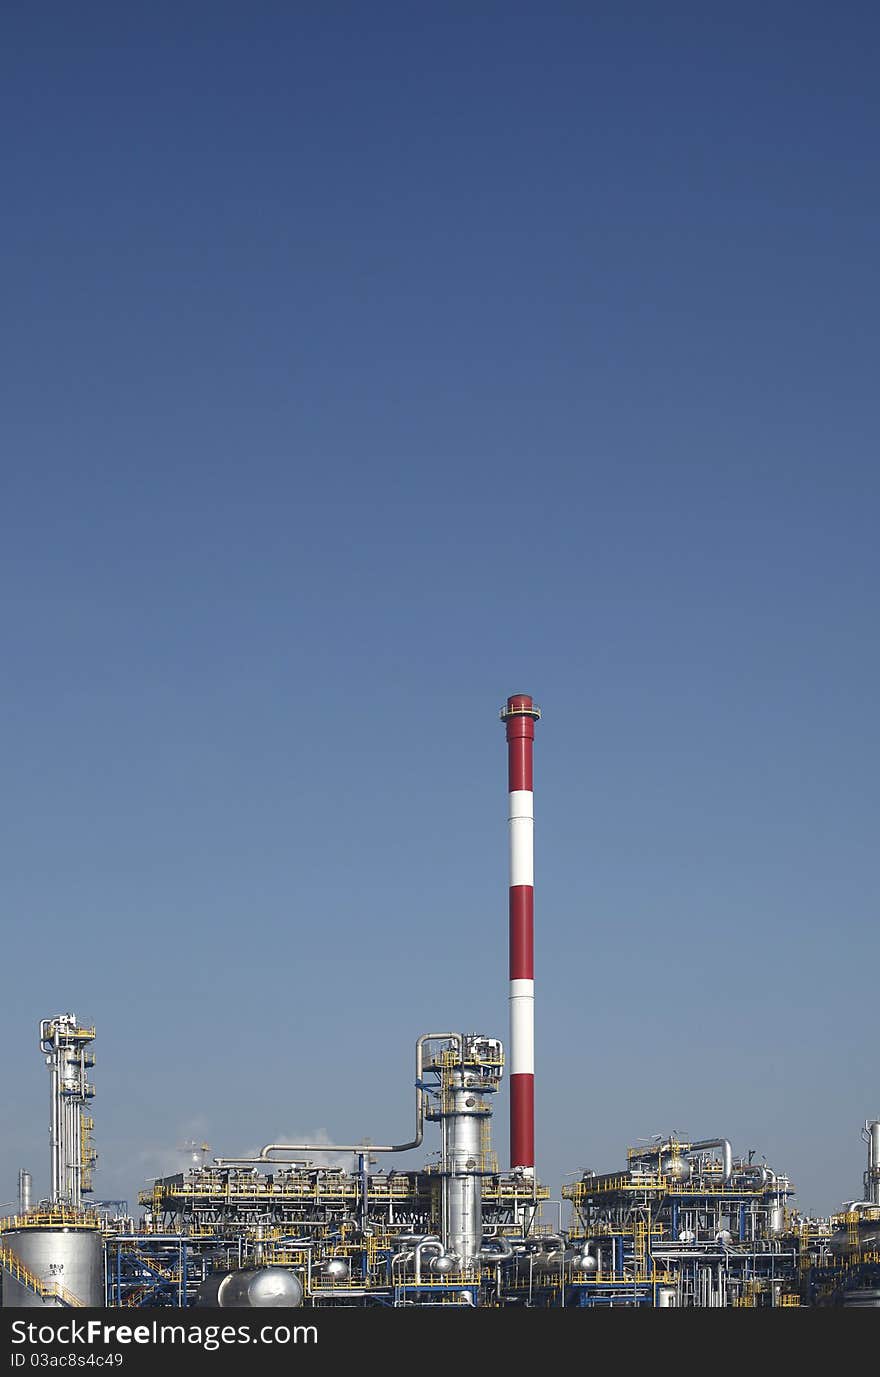 Part of refinery complex - chimney